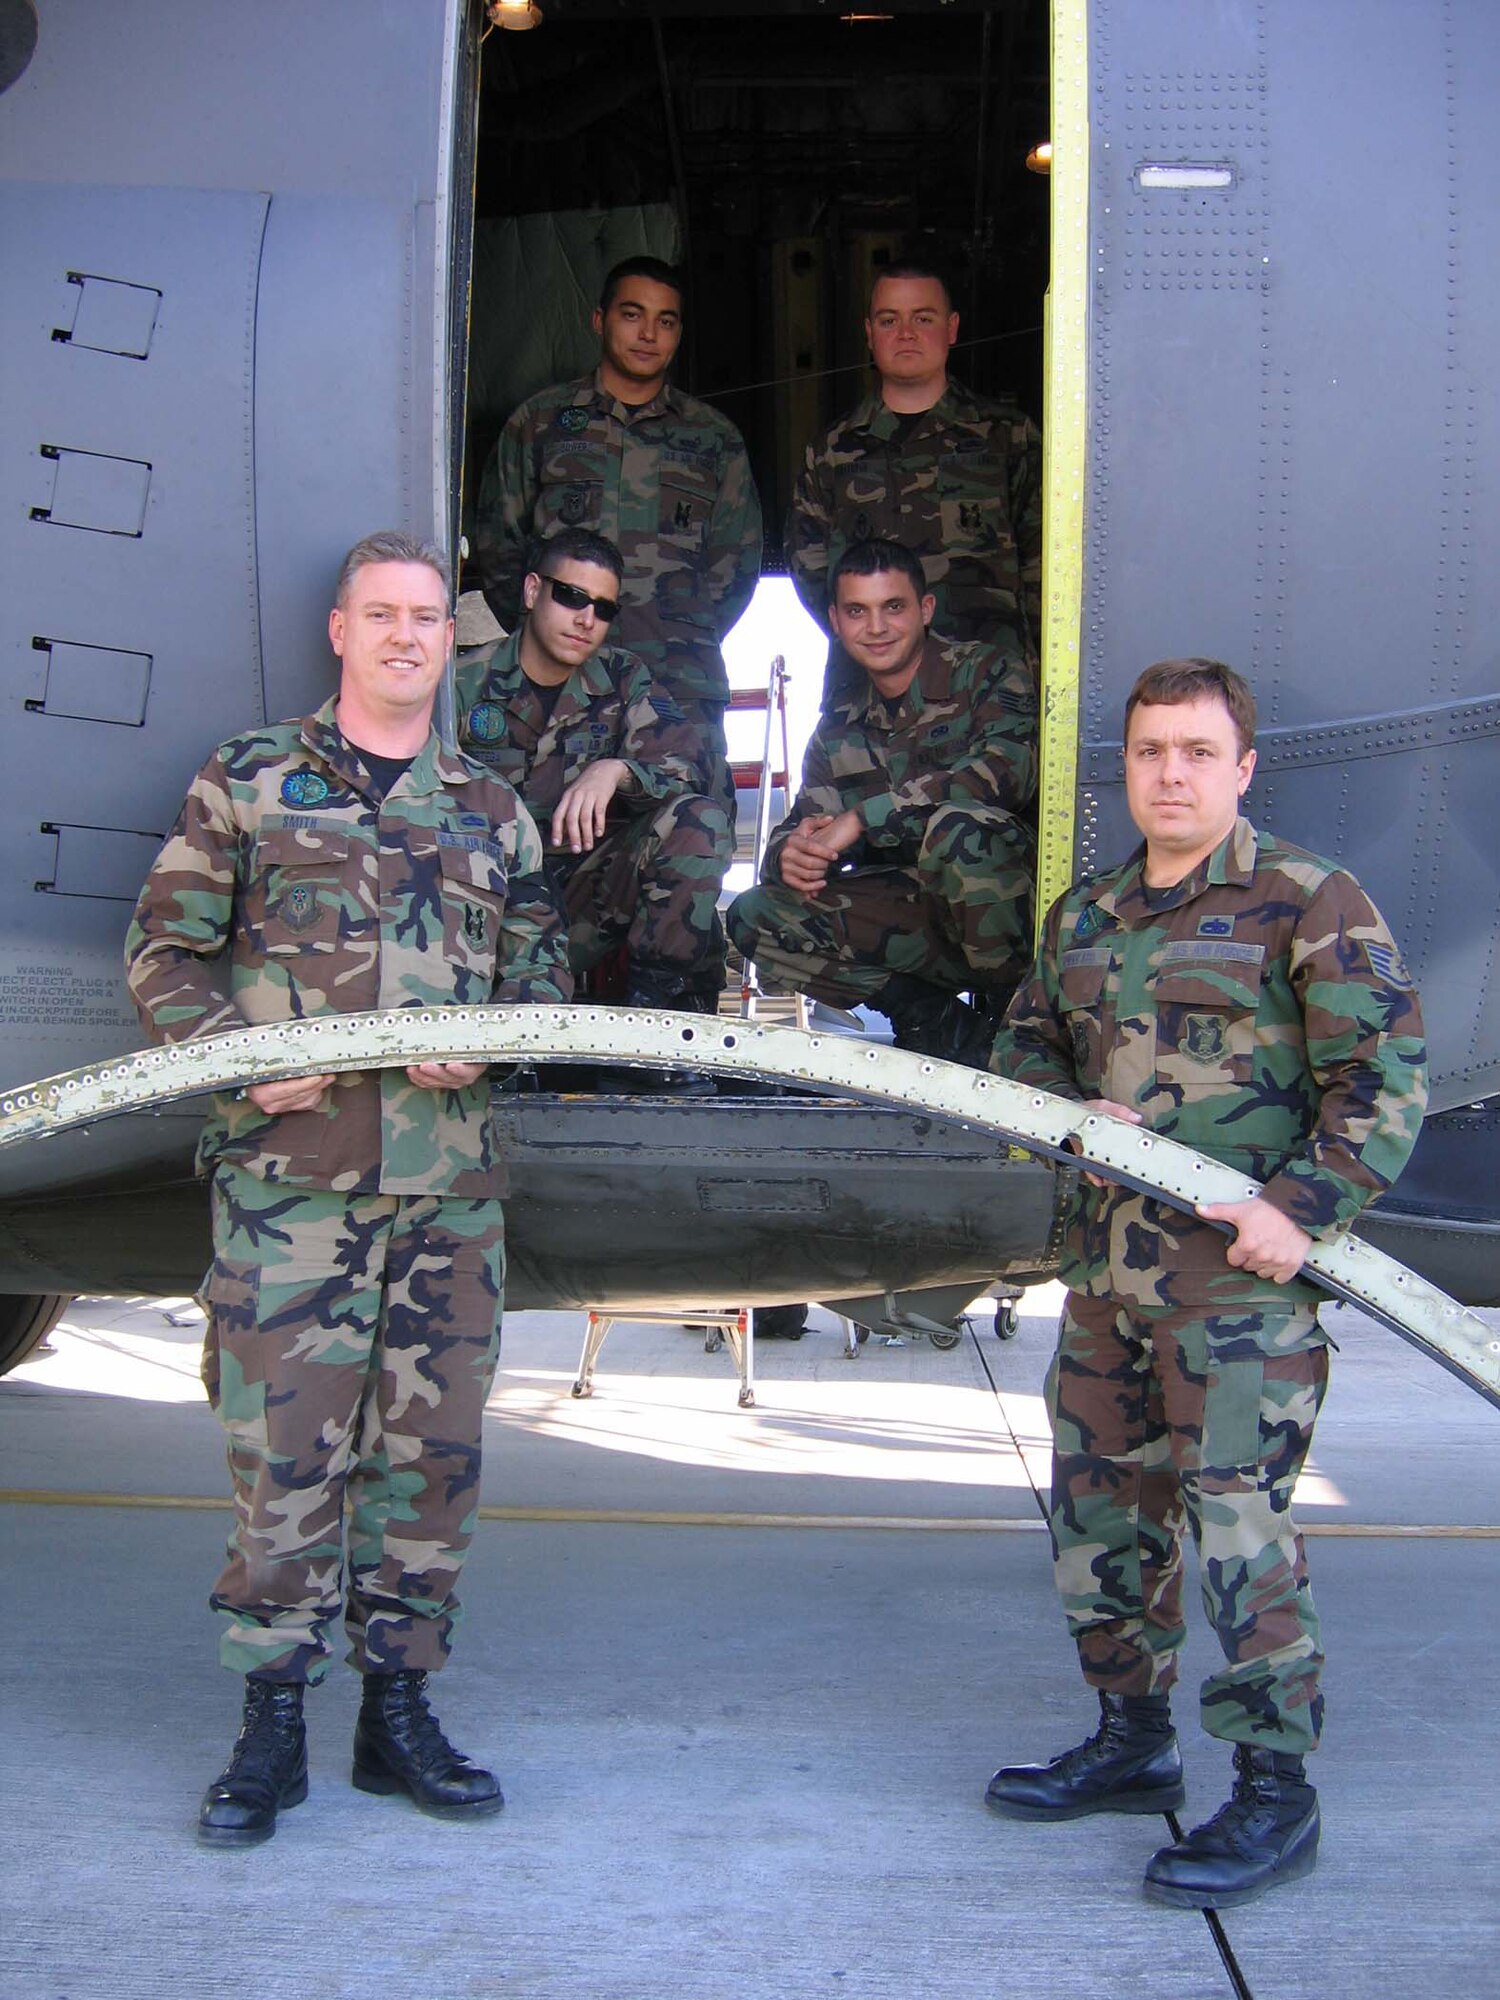 (Bottom to top) Tech Sgt. Patrick Smith, Staff Sgt. Thomas Downward, Staff Sgt. Christopher Ortega, Staff Sgt. Nicholas Souza, Airman 1st Class Bryan Bowers and Staff Sgt. Ivan Sterpin, 347th Aircraft Maintenance Squadron at Moody Air Force Base, Ga., completed depot-level maintenance Dec. 2 on a 347th Rescue Wing's HC-130P/N. They completed the repairs 20 days ahead of schedule saving the Air Force approximately $30,000. (Photo by Senior Airman S.I. Fielder)